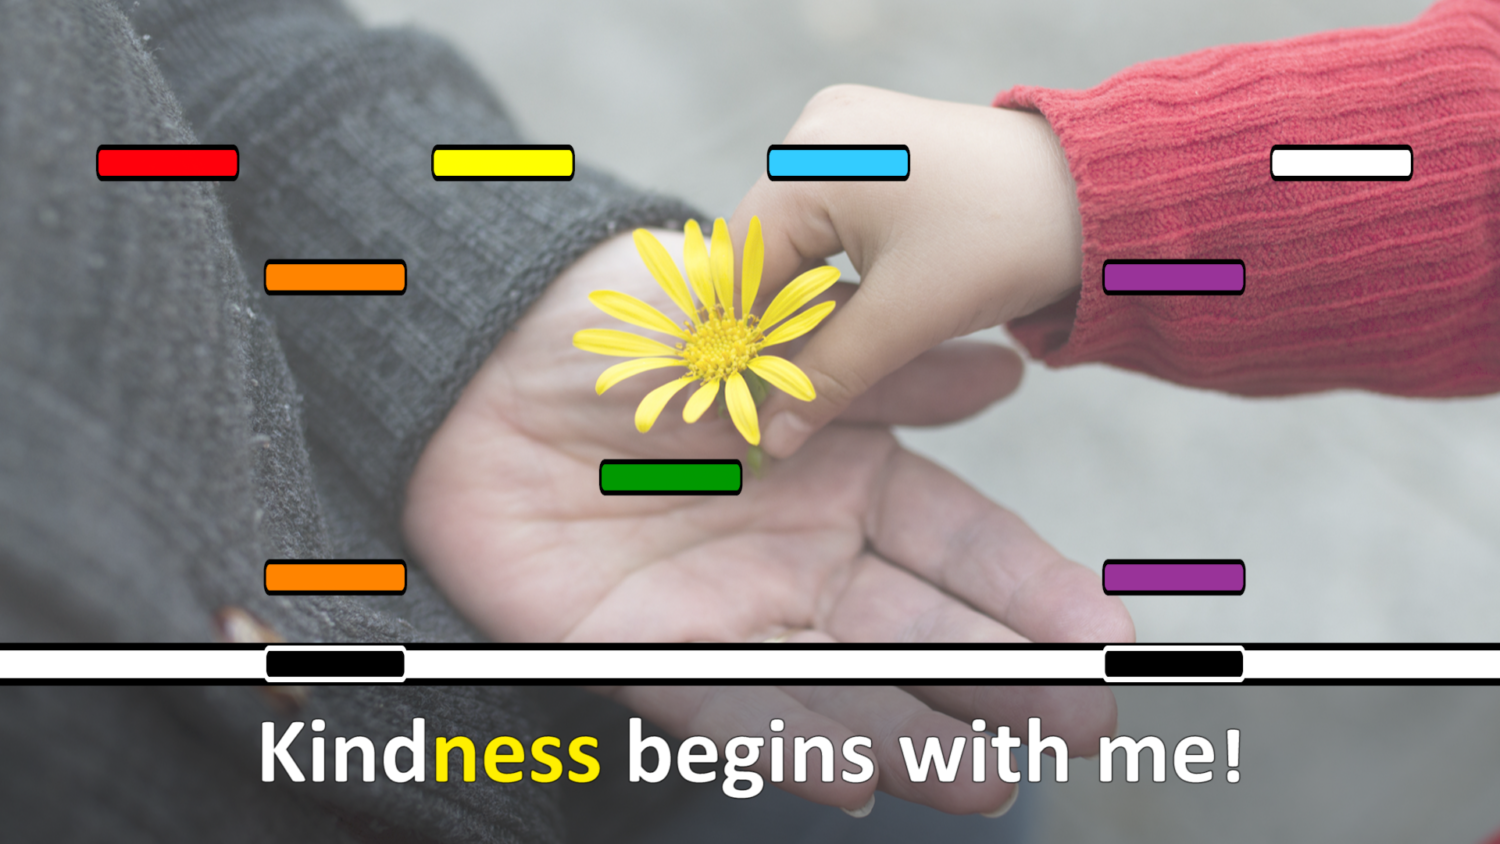 23 Kindness Begins with Me Singing Time Ideas Singing time ideas for Primary Music Leaders H Kindness Begins with Me0